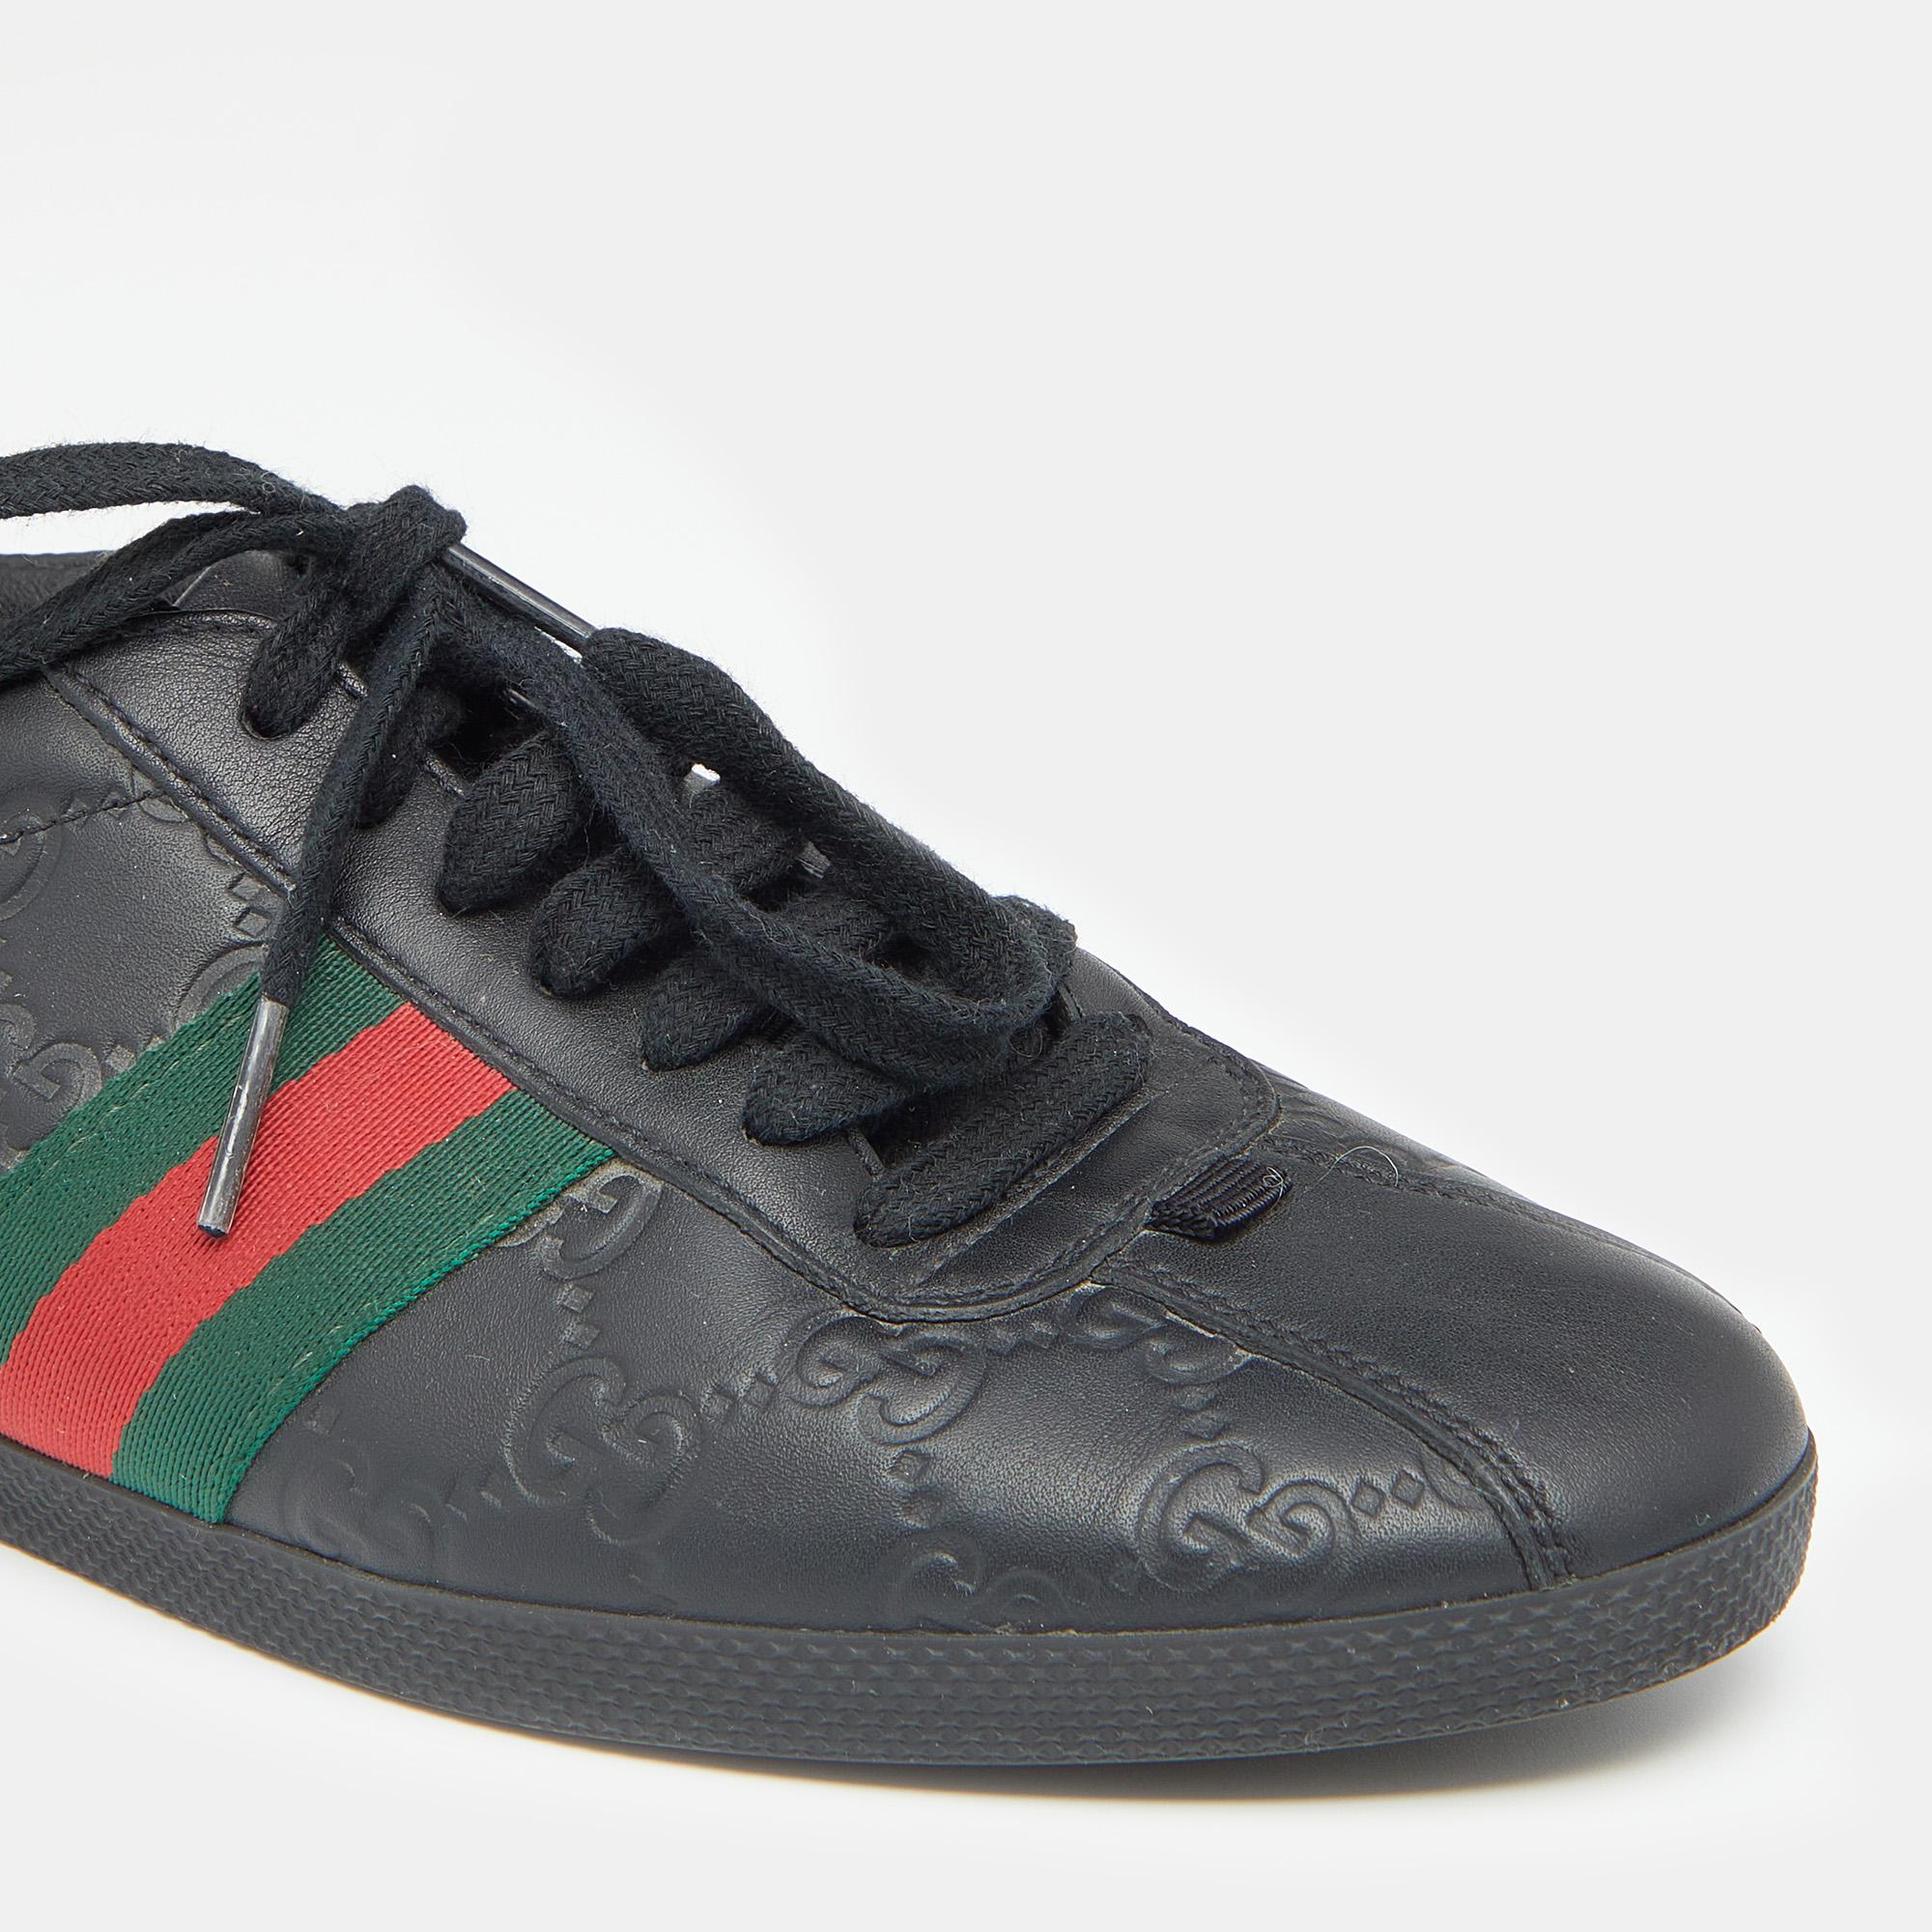 Gucci Black Guccissima Leather Web Low Top Sneakers Size 37 2